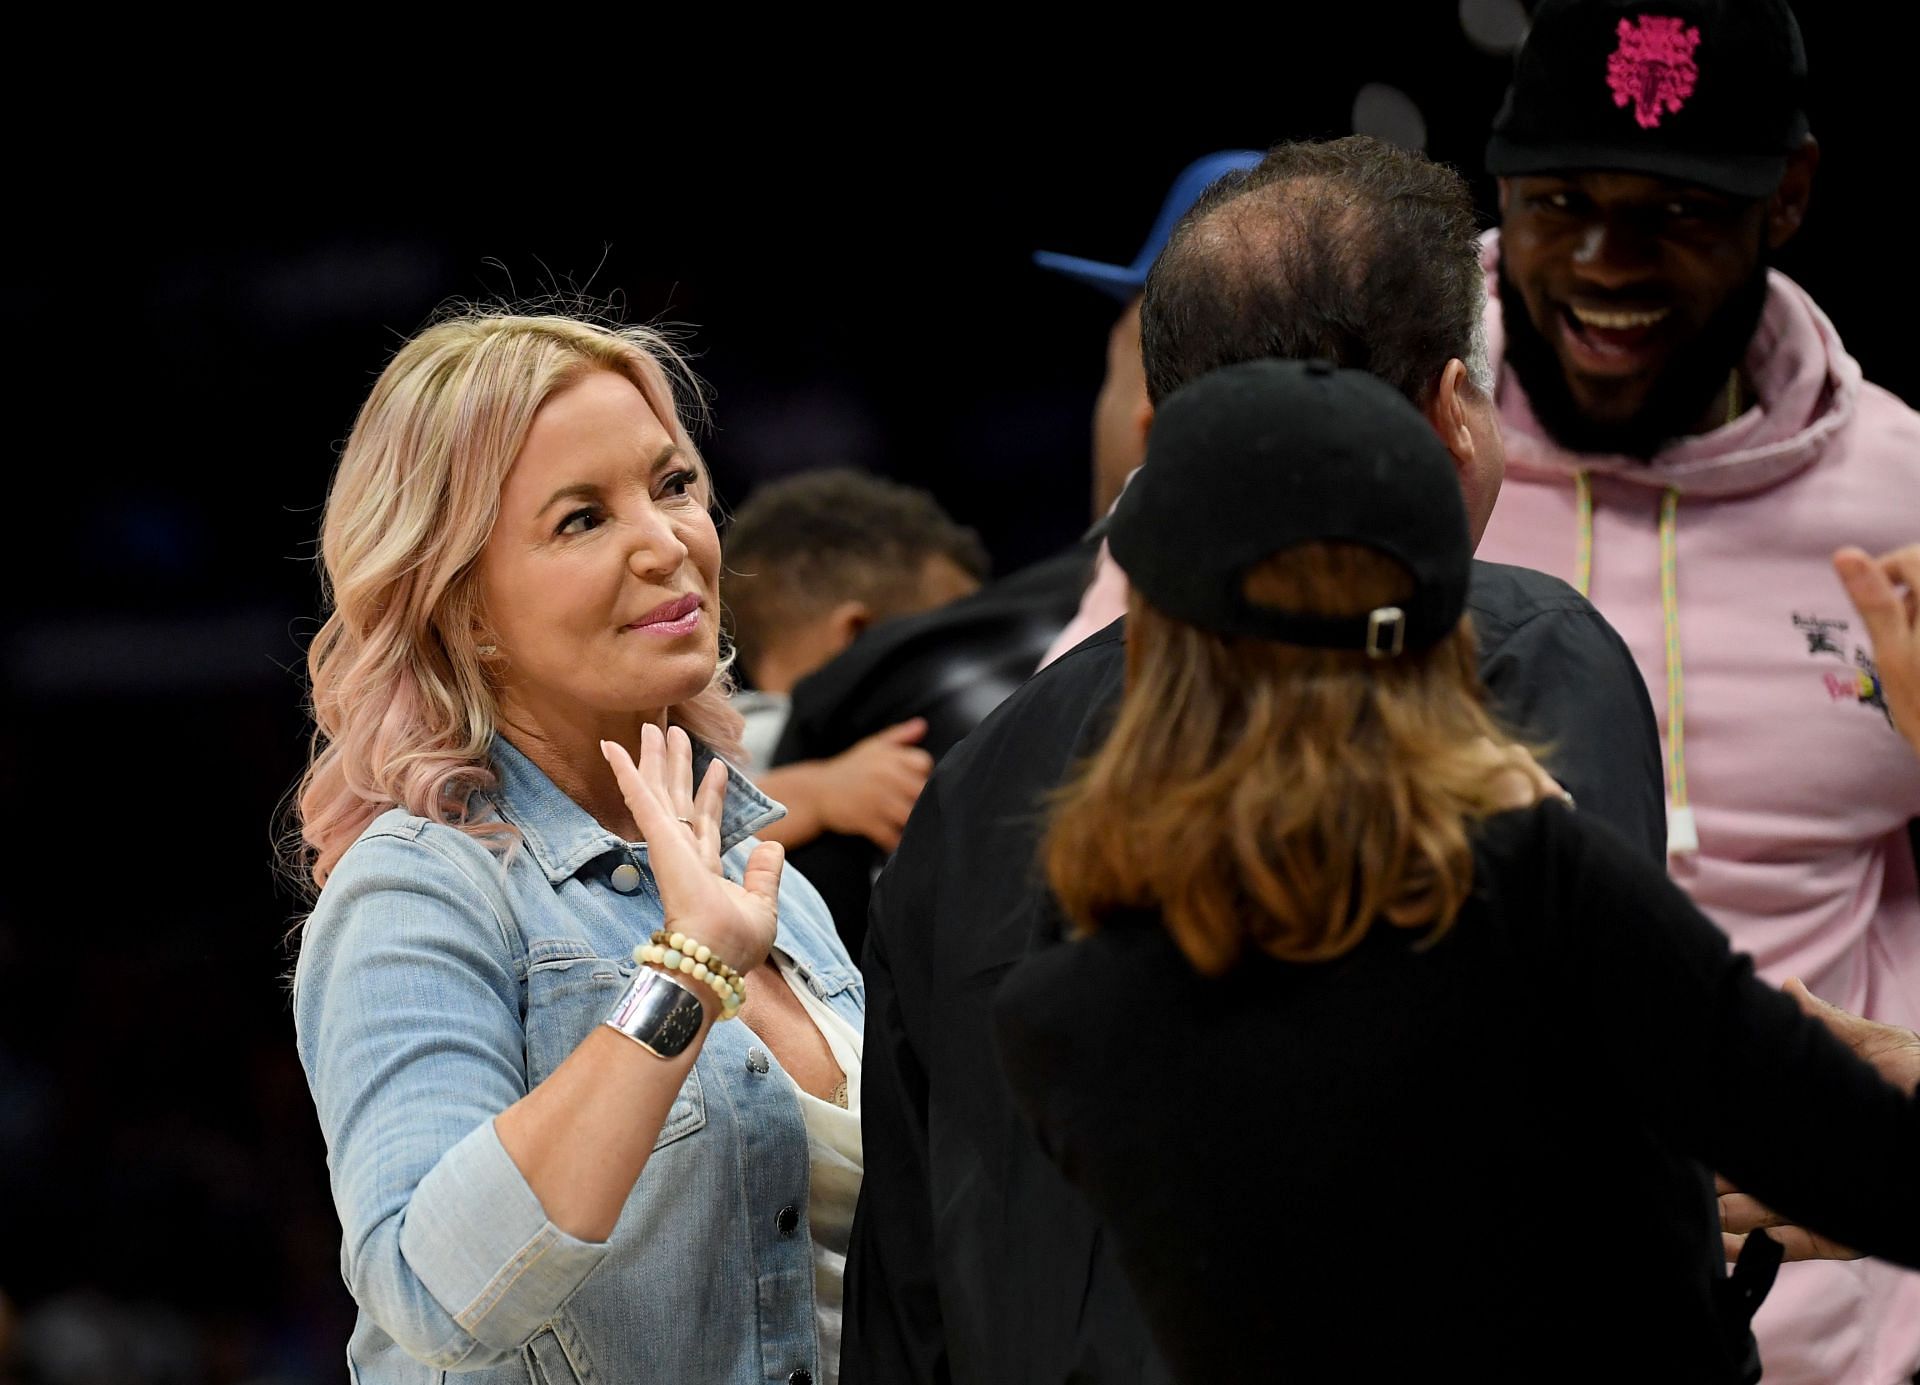 Jeanie Buss during a game in the BIG3 Championship.